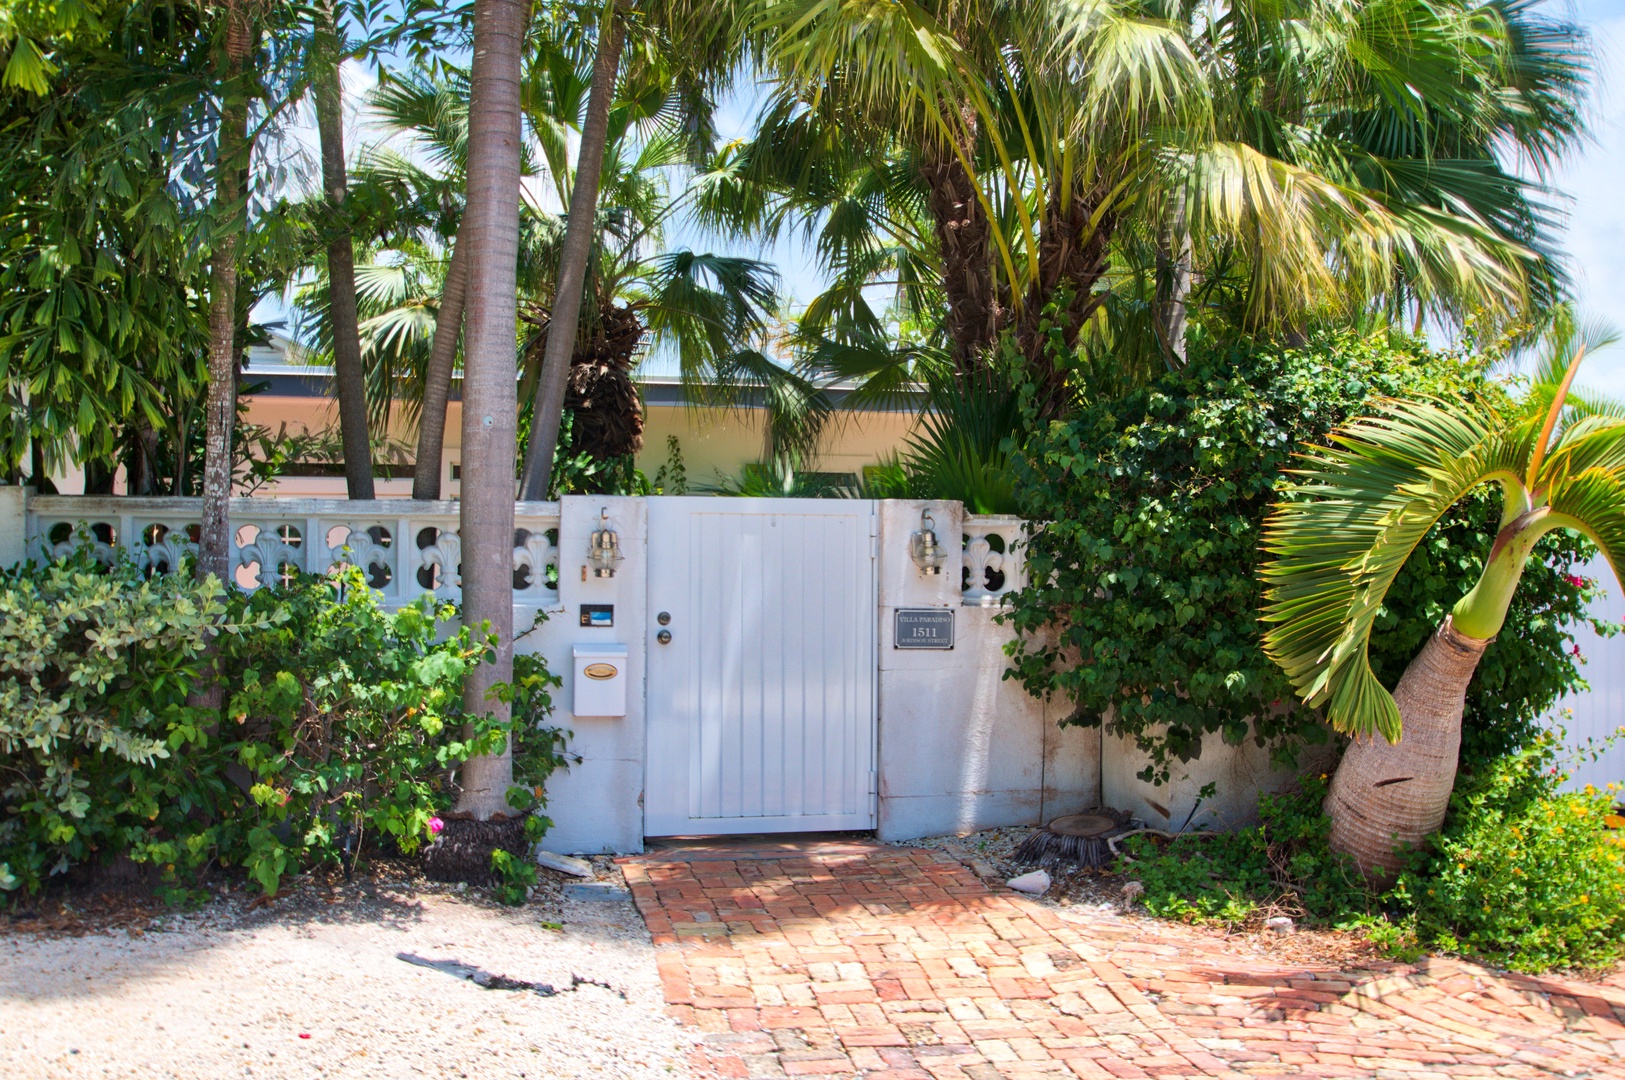 Gated Driveway to Parking Villa Paradiso Key West